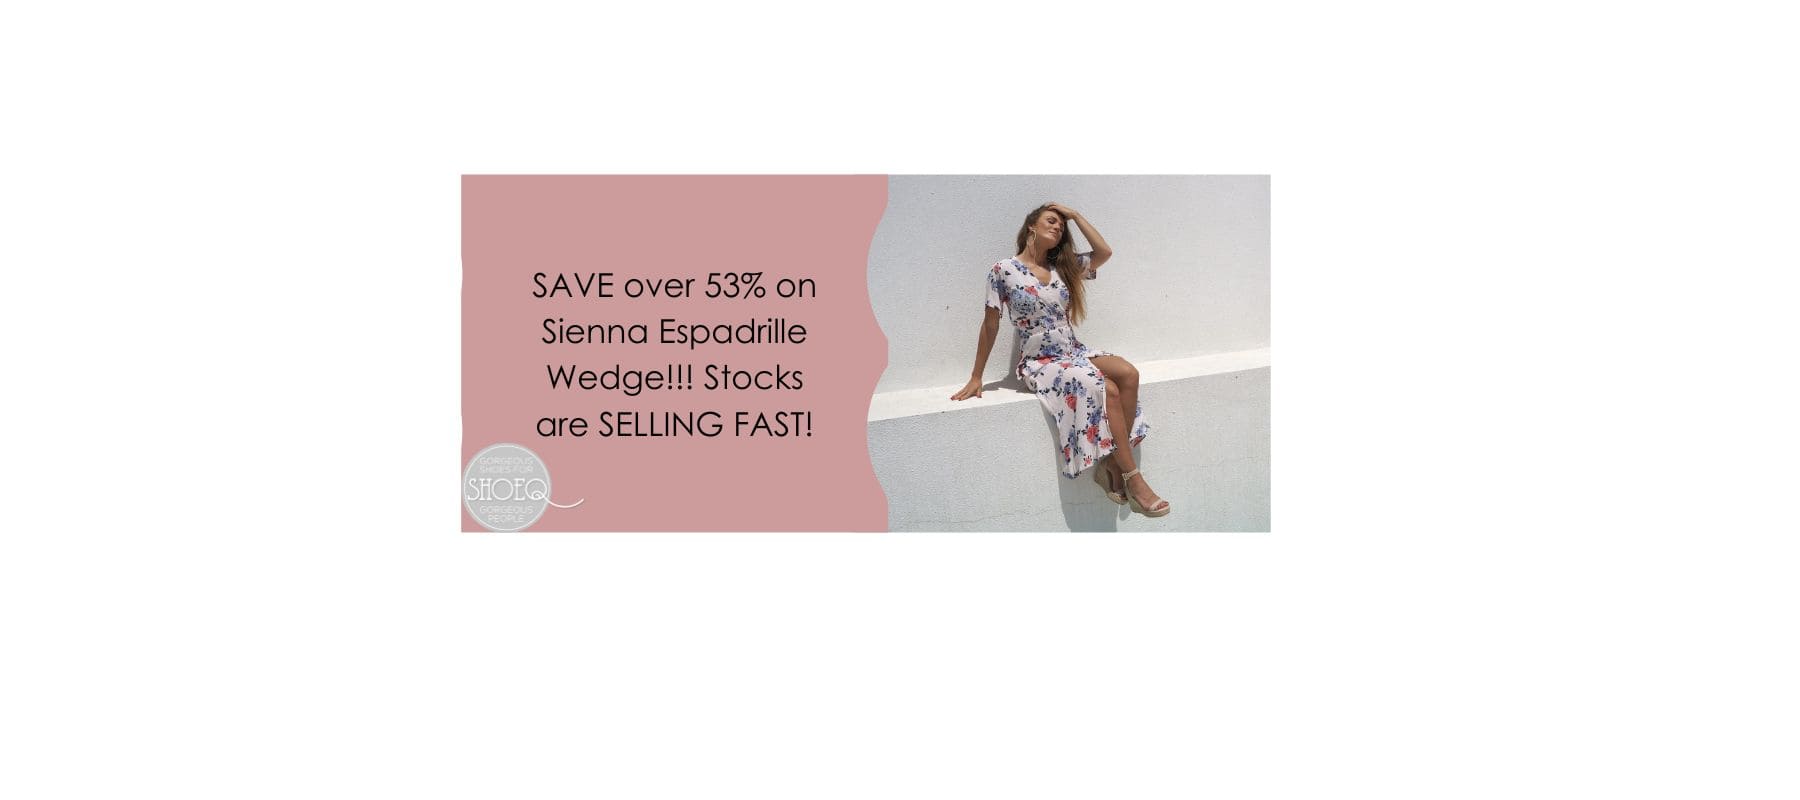 SAVE over 53% on Sienna Espadrille Wedge!!! Stocks are SELLING FAST! - Shoeq